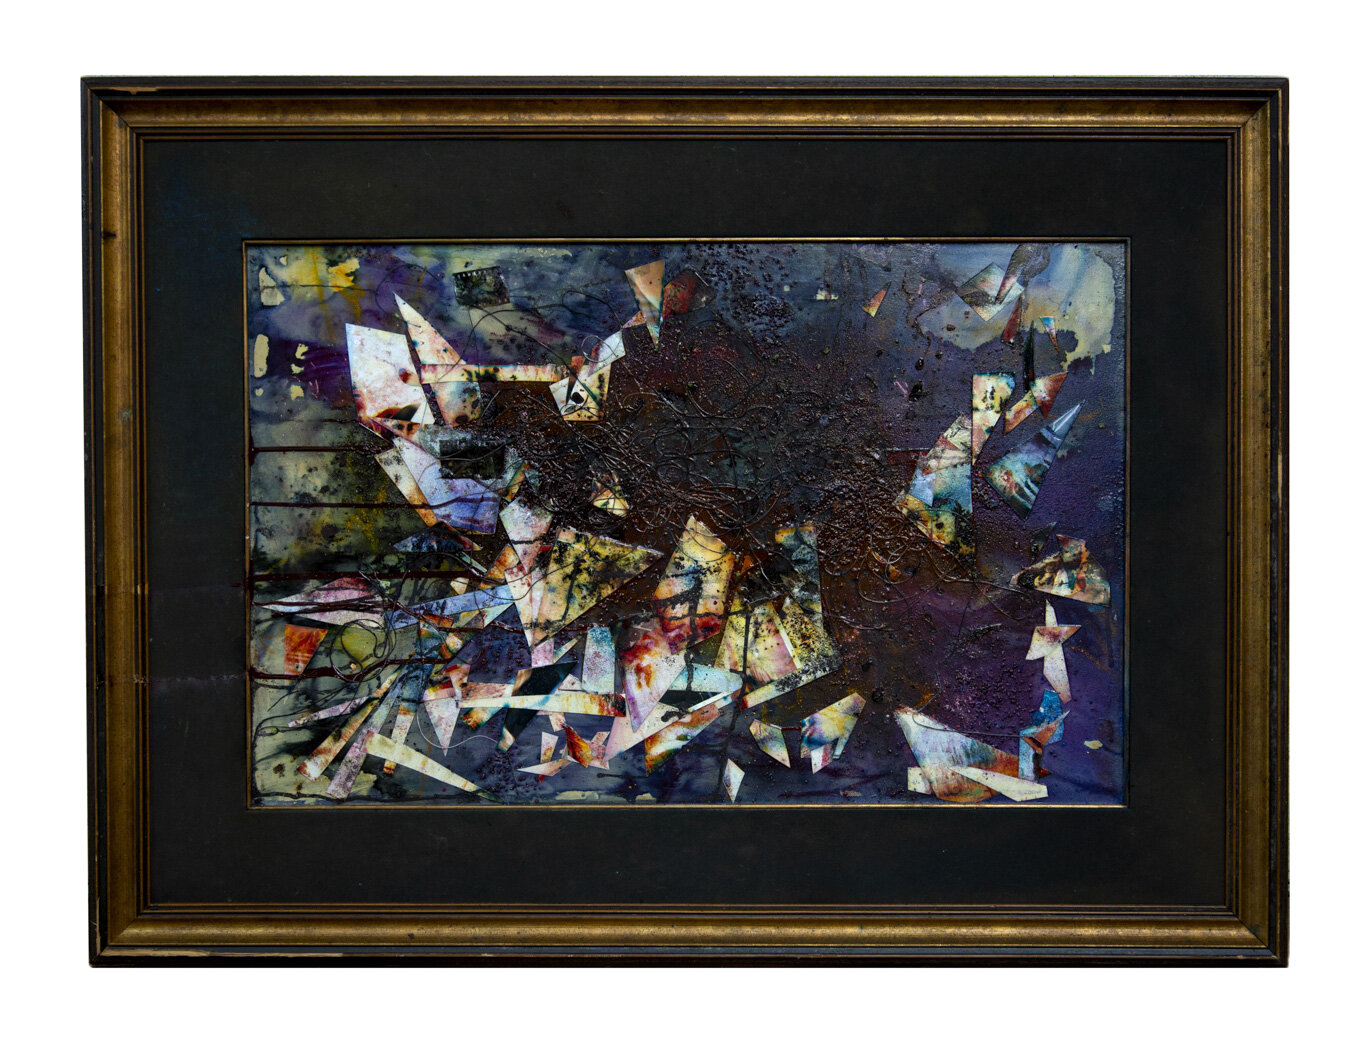   History Exposed   photographs, negatives, and mixed media on found frame  42in x 32in  2019 